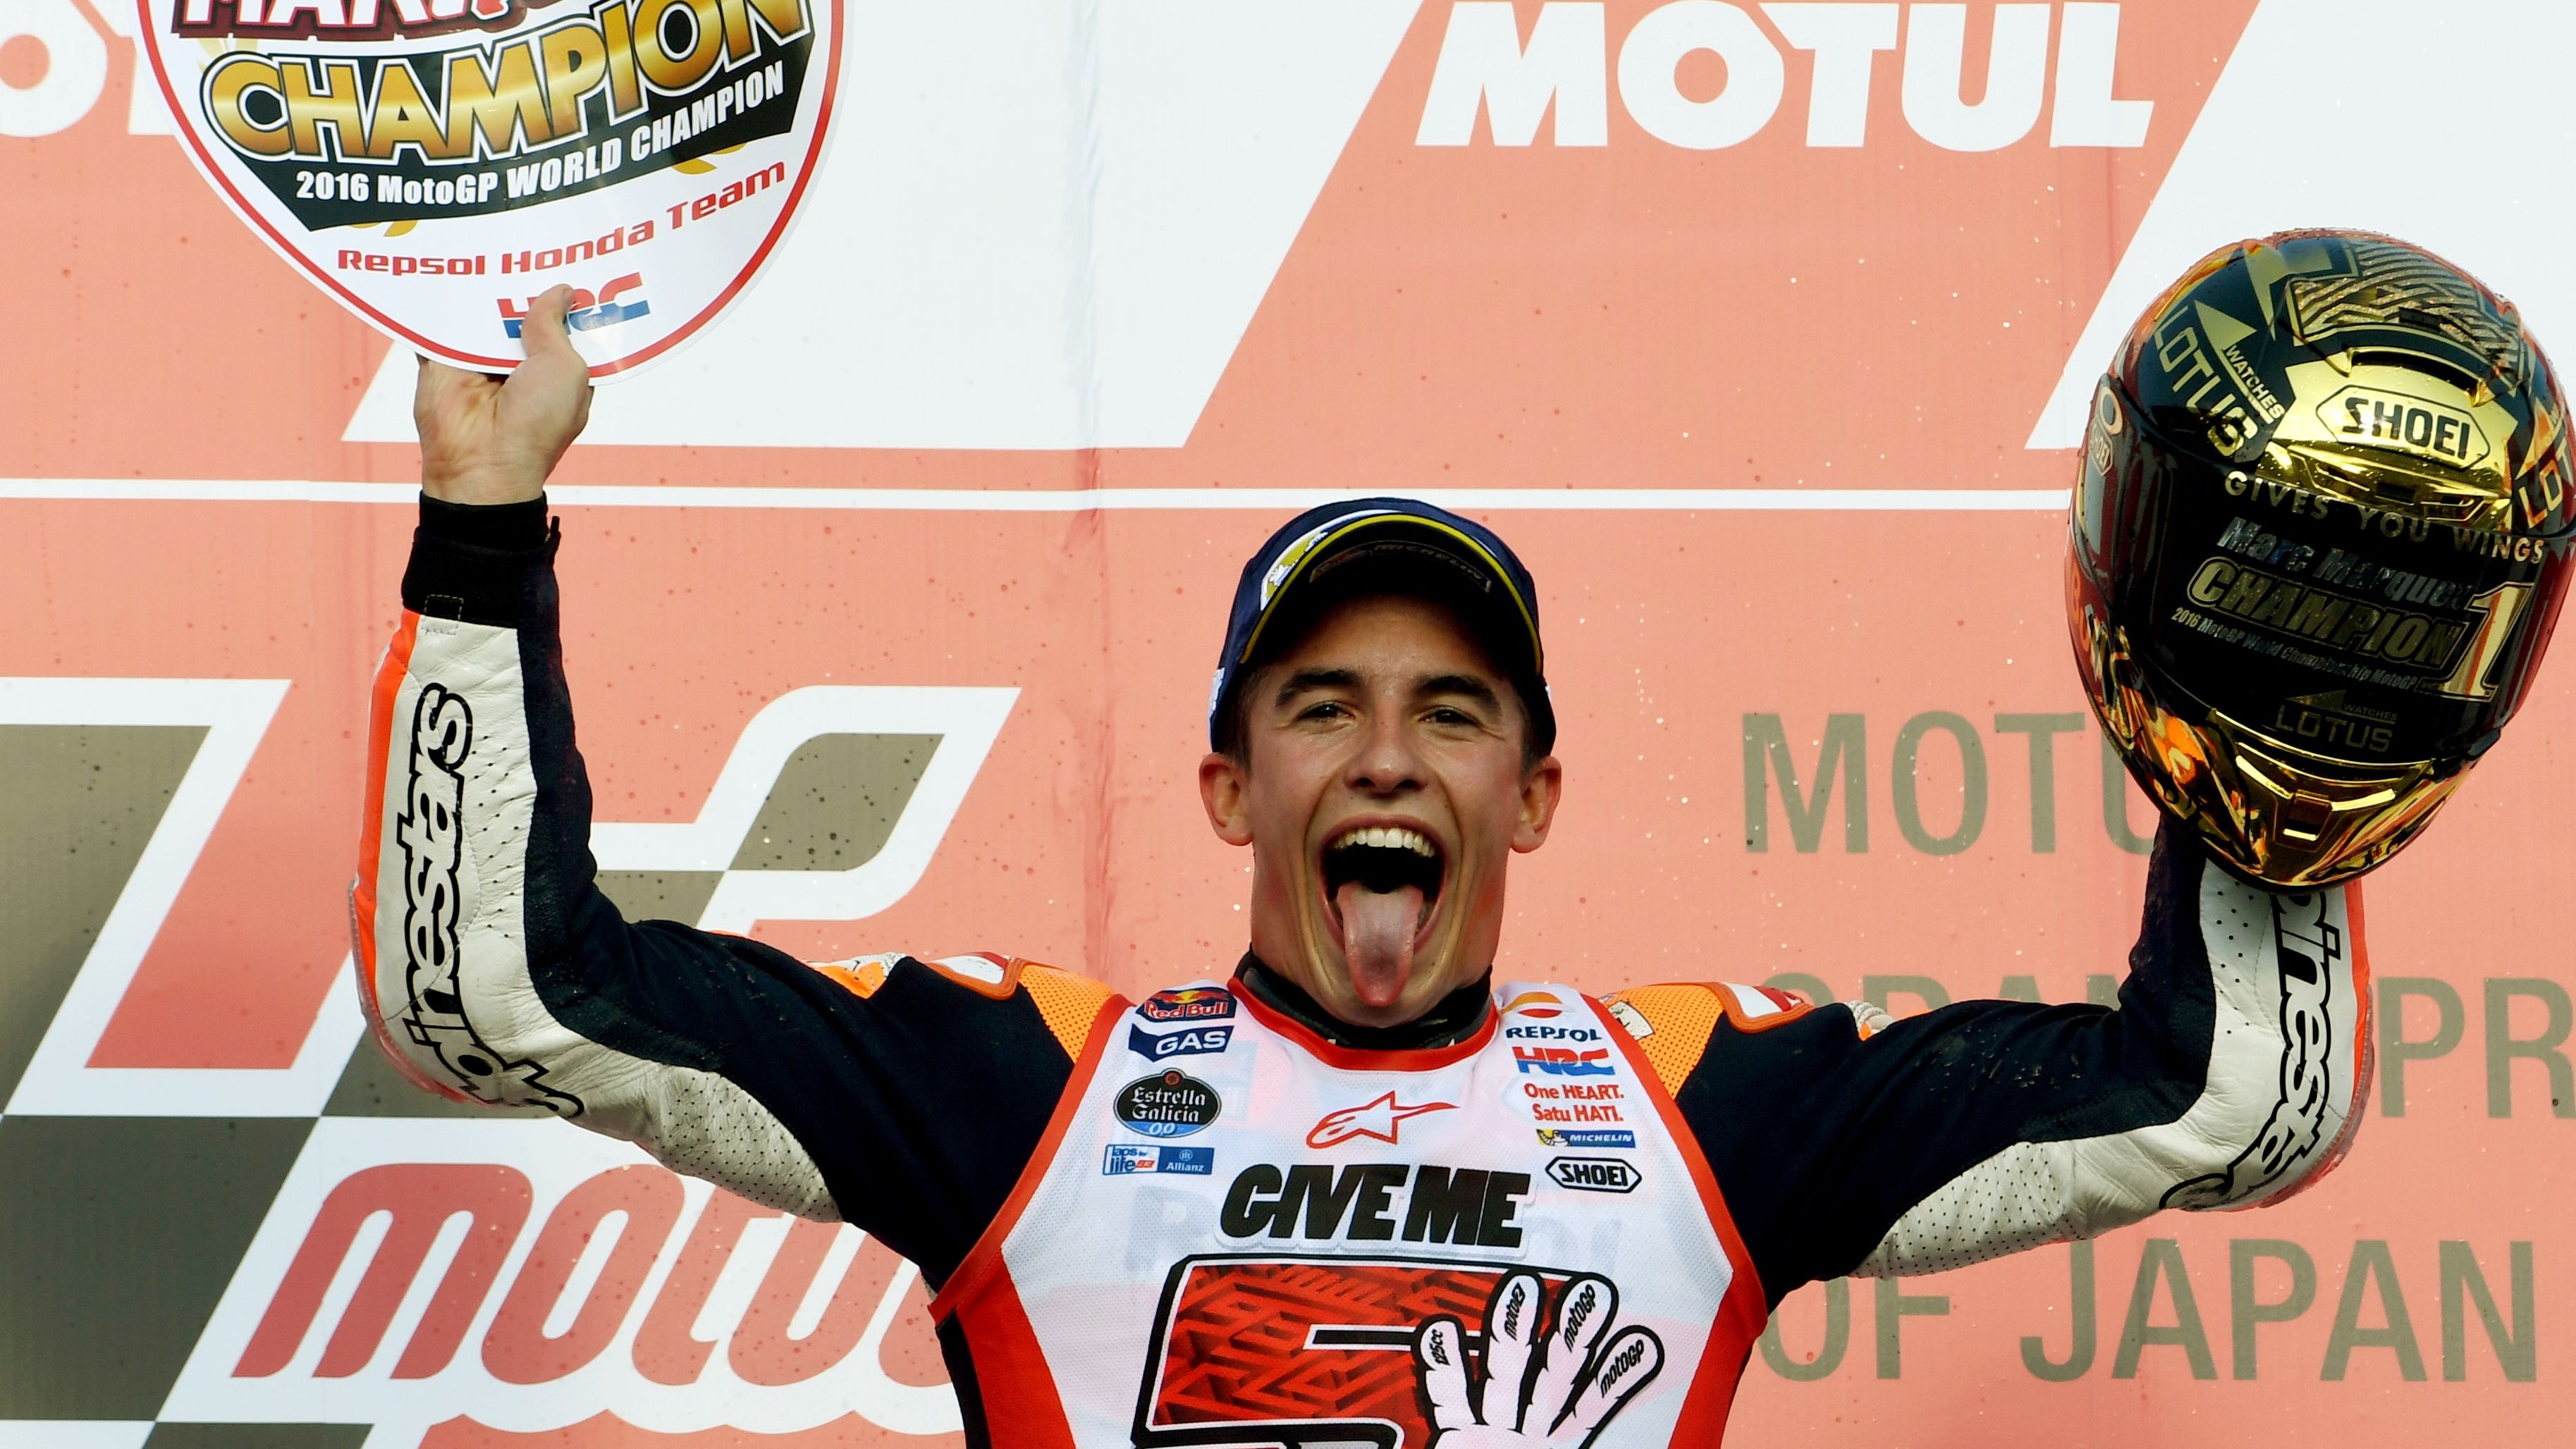 Spain's Marc Marquez celebrates his title winning victory at the Japanese MotoGP at Motegi.